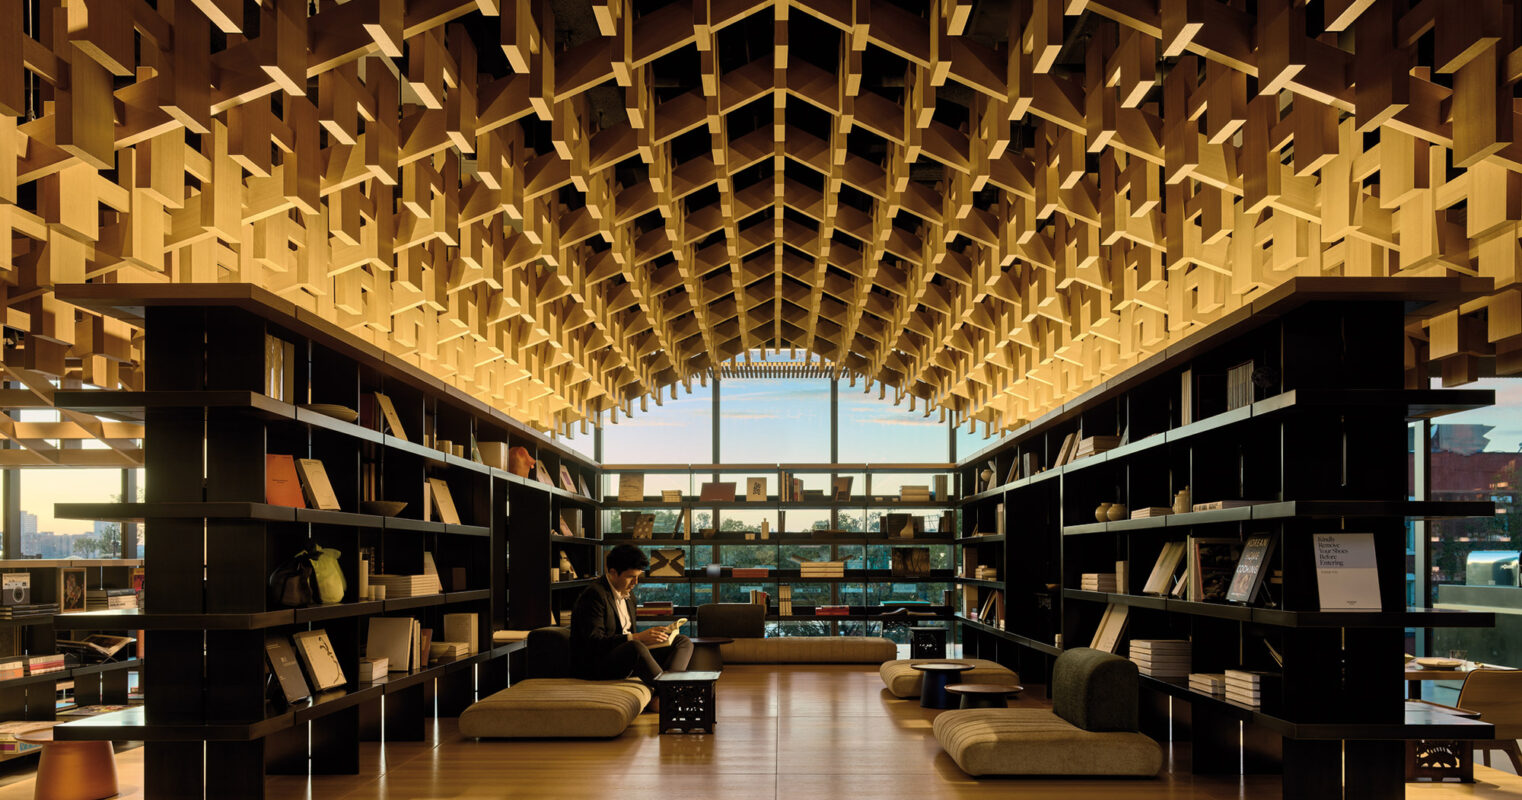 A tranquil and modern library space adorned with an intricate wooden lattice ceiling and cozy seating, inviting visitors to read and explore amidst the geometric harmony.